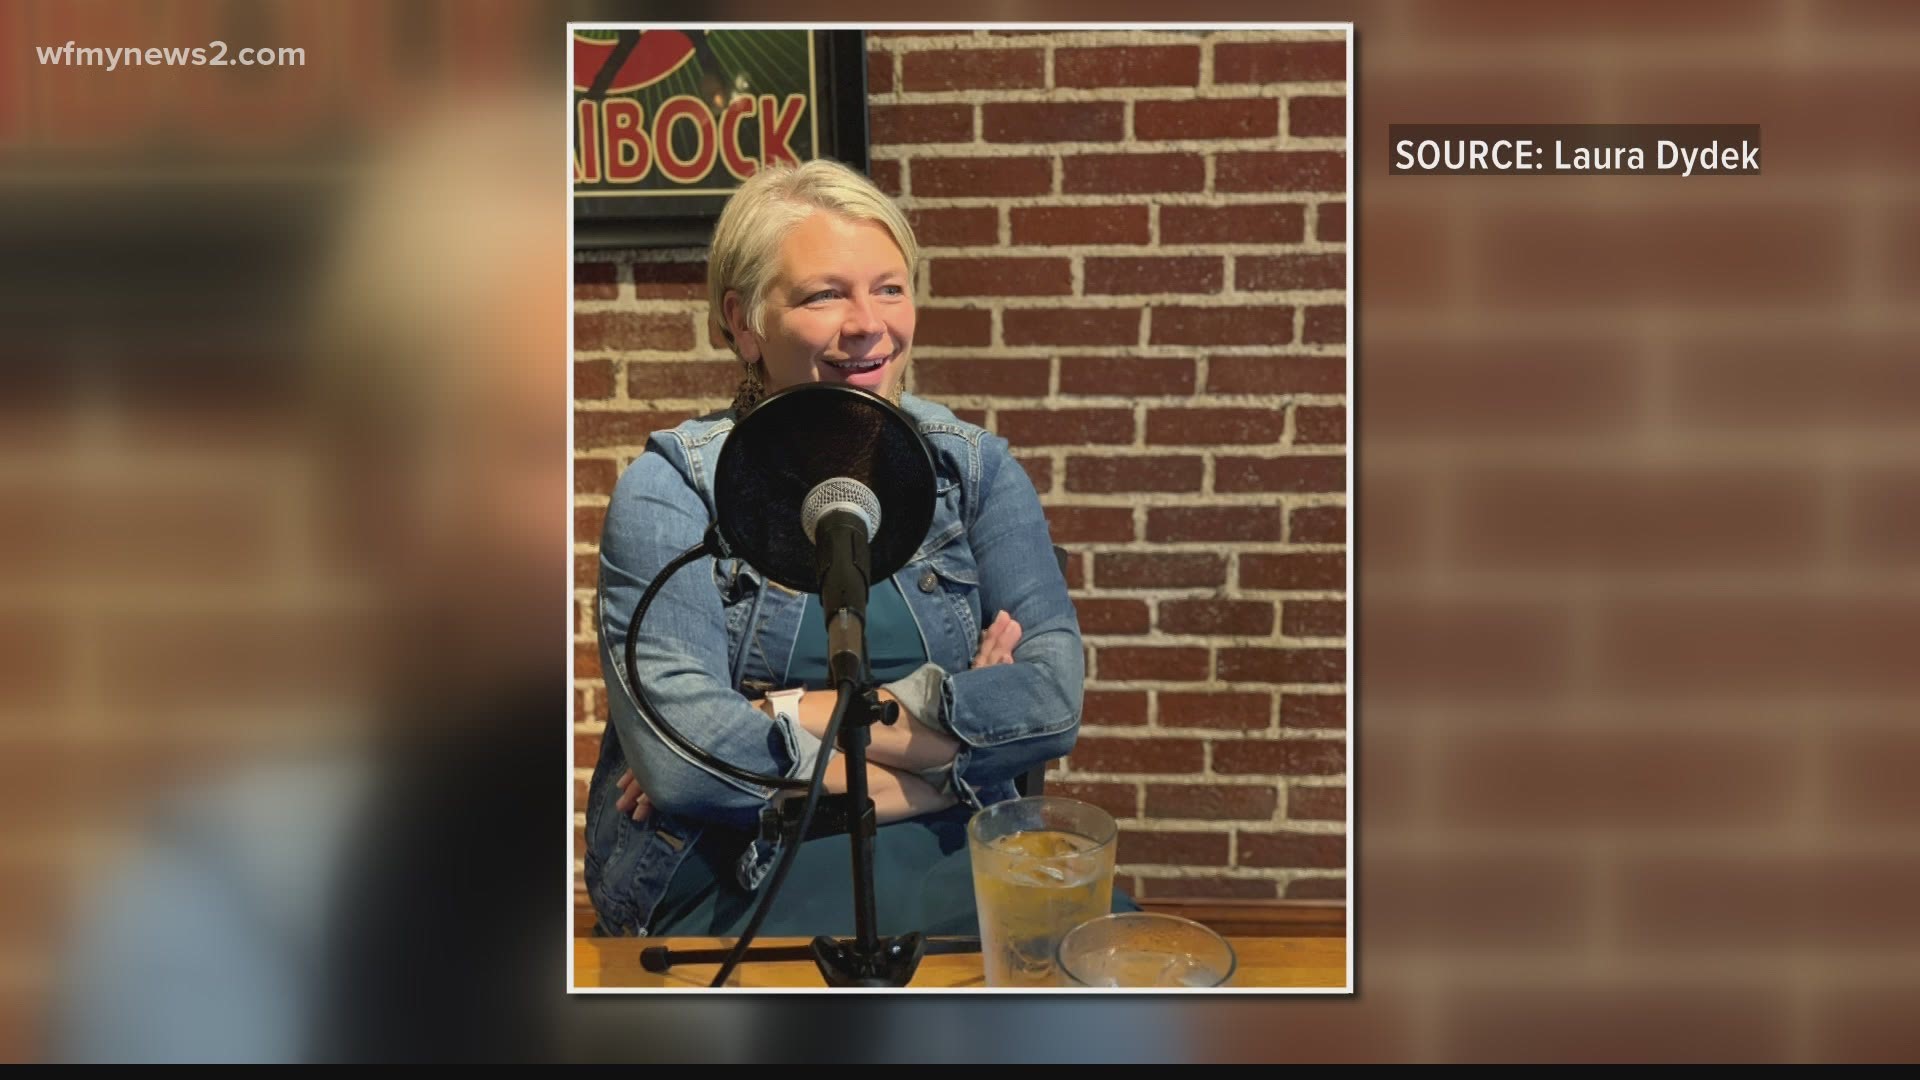 Four local moms created a podcast called "Triad Moms on the Mic"